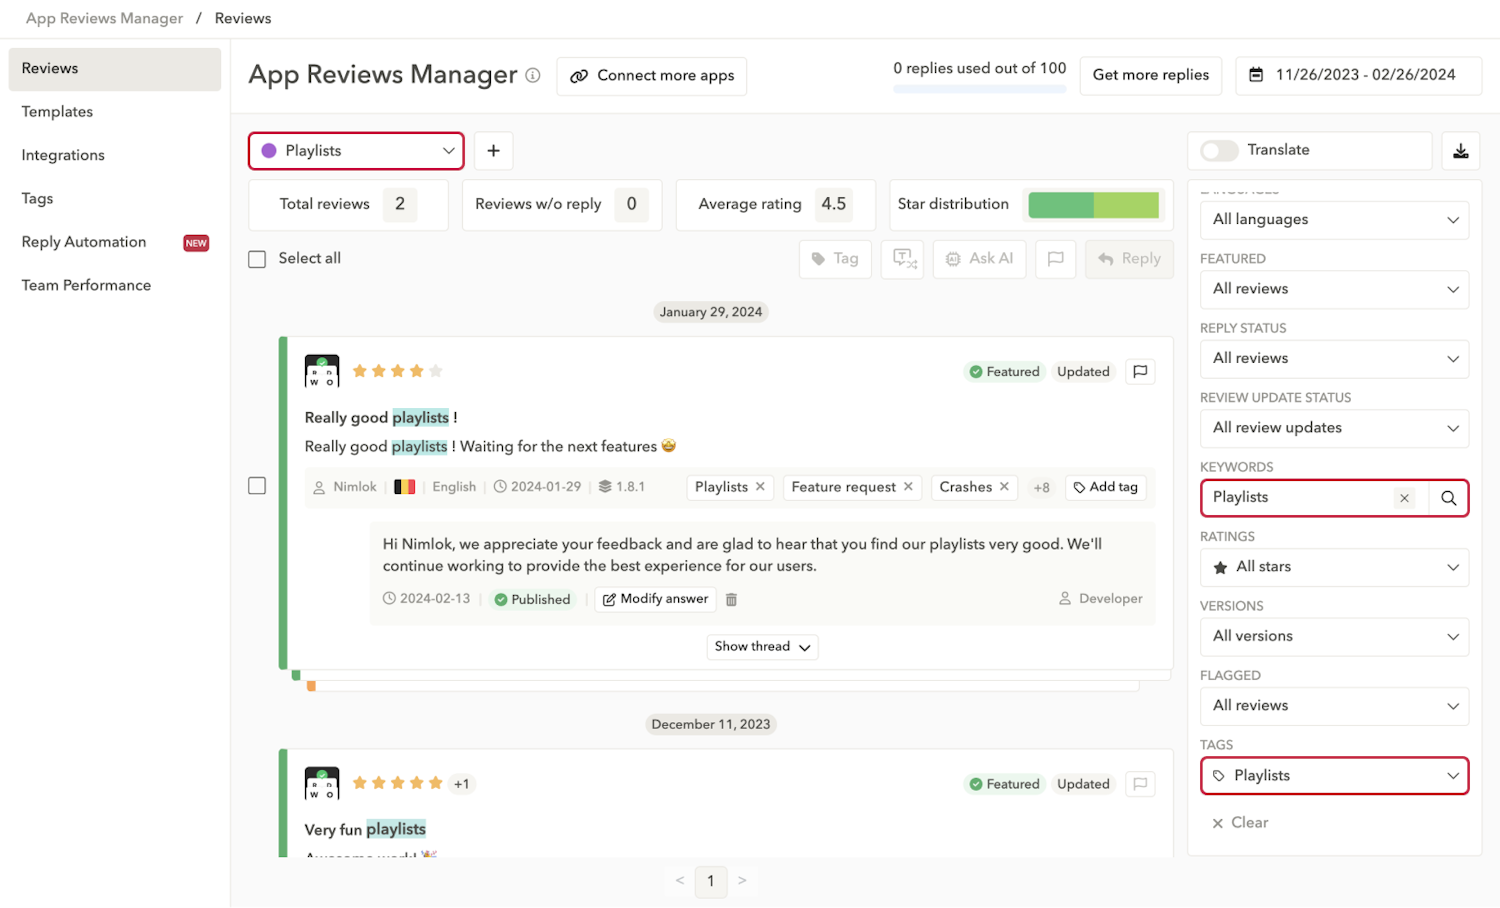 app-reviews-manager-tags